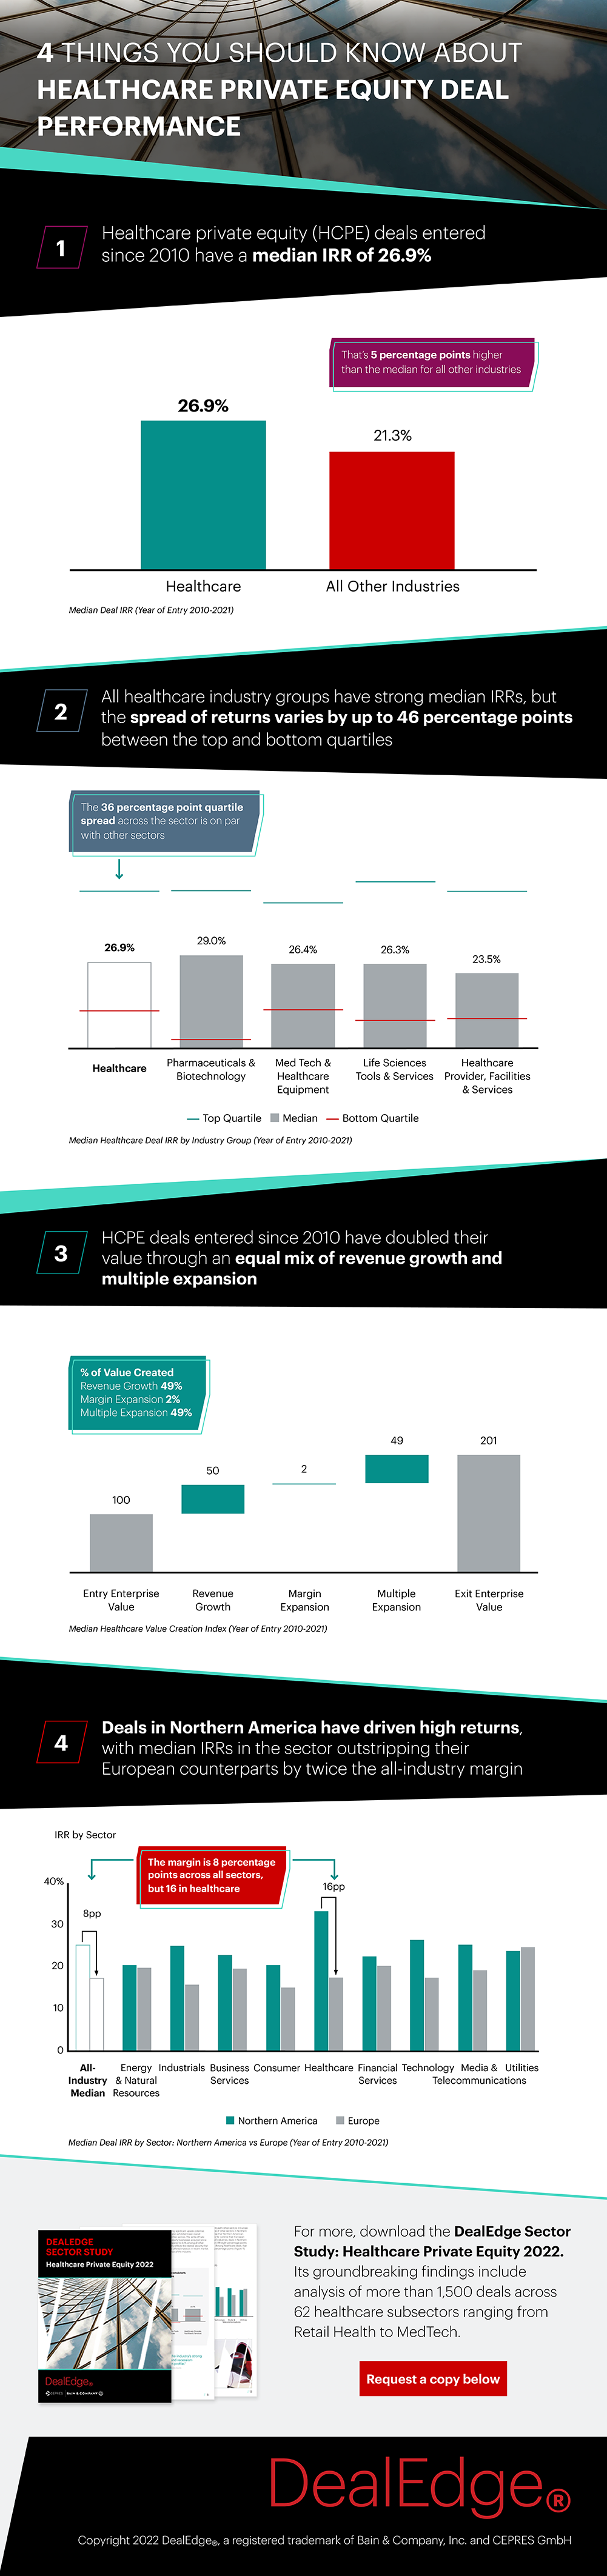 4 Things to Know about Healthcare Private Equity Deal Performance Infographic